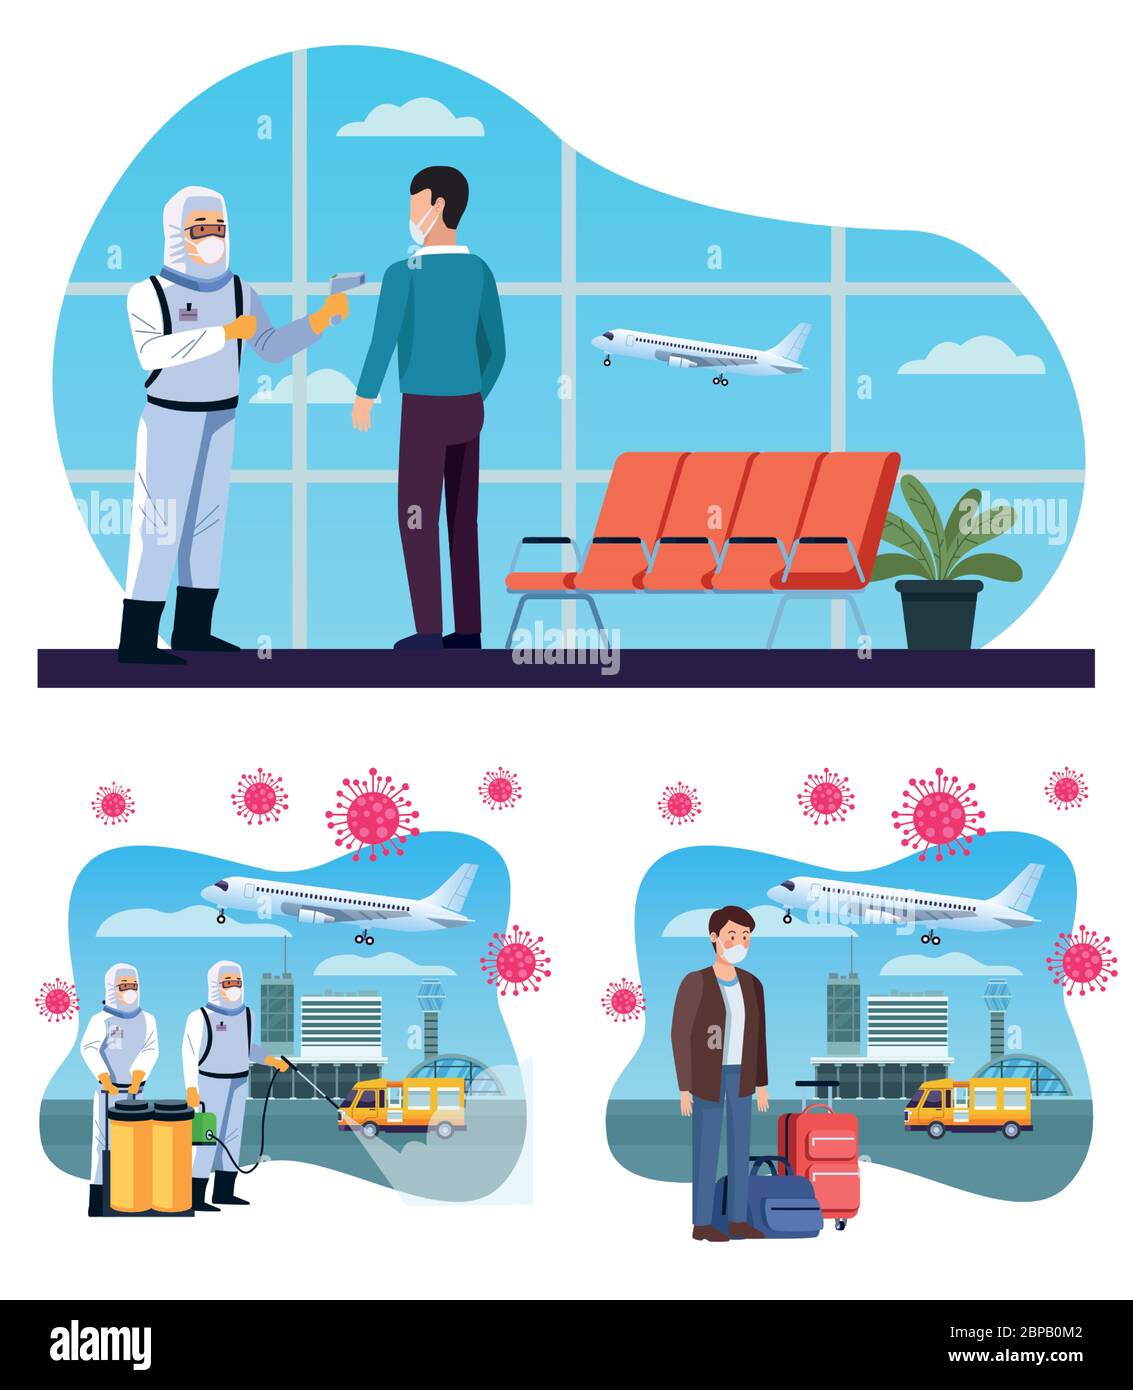 biosafety workers desinfect airport and checking temperature for covid19 Stock Vector